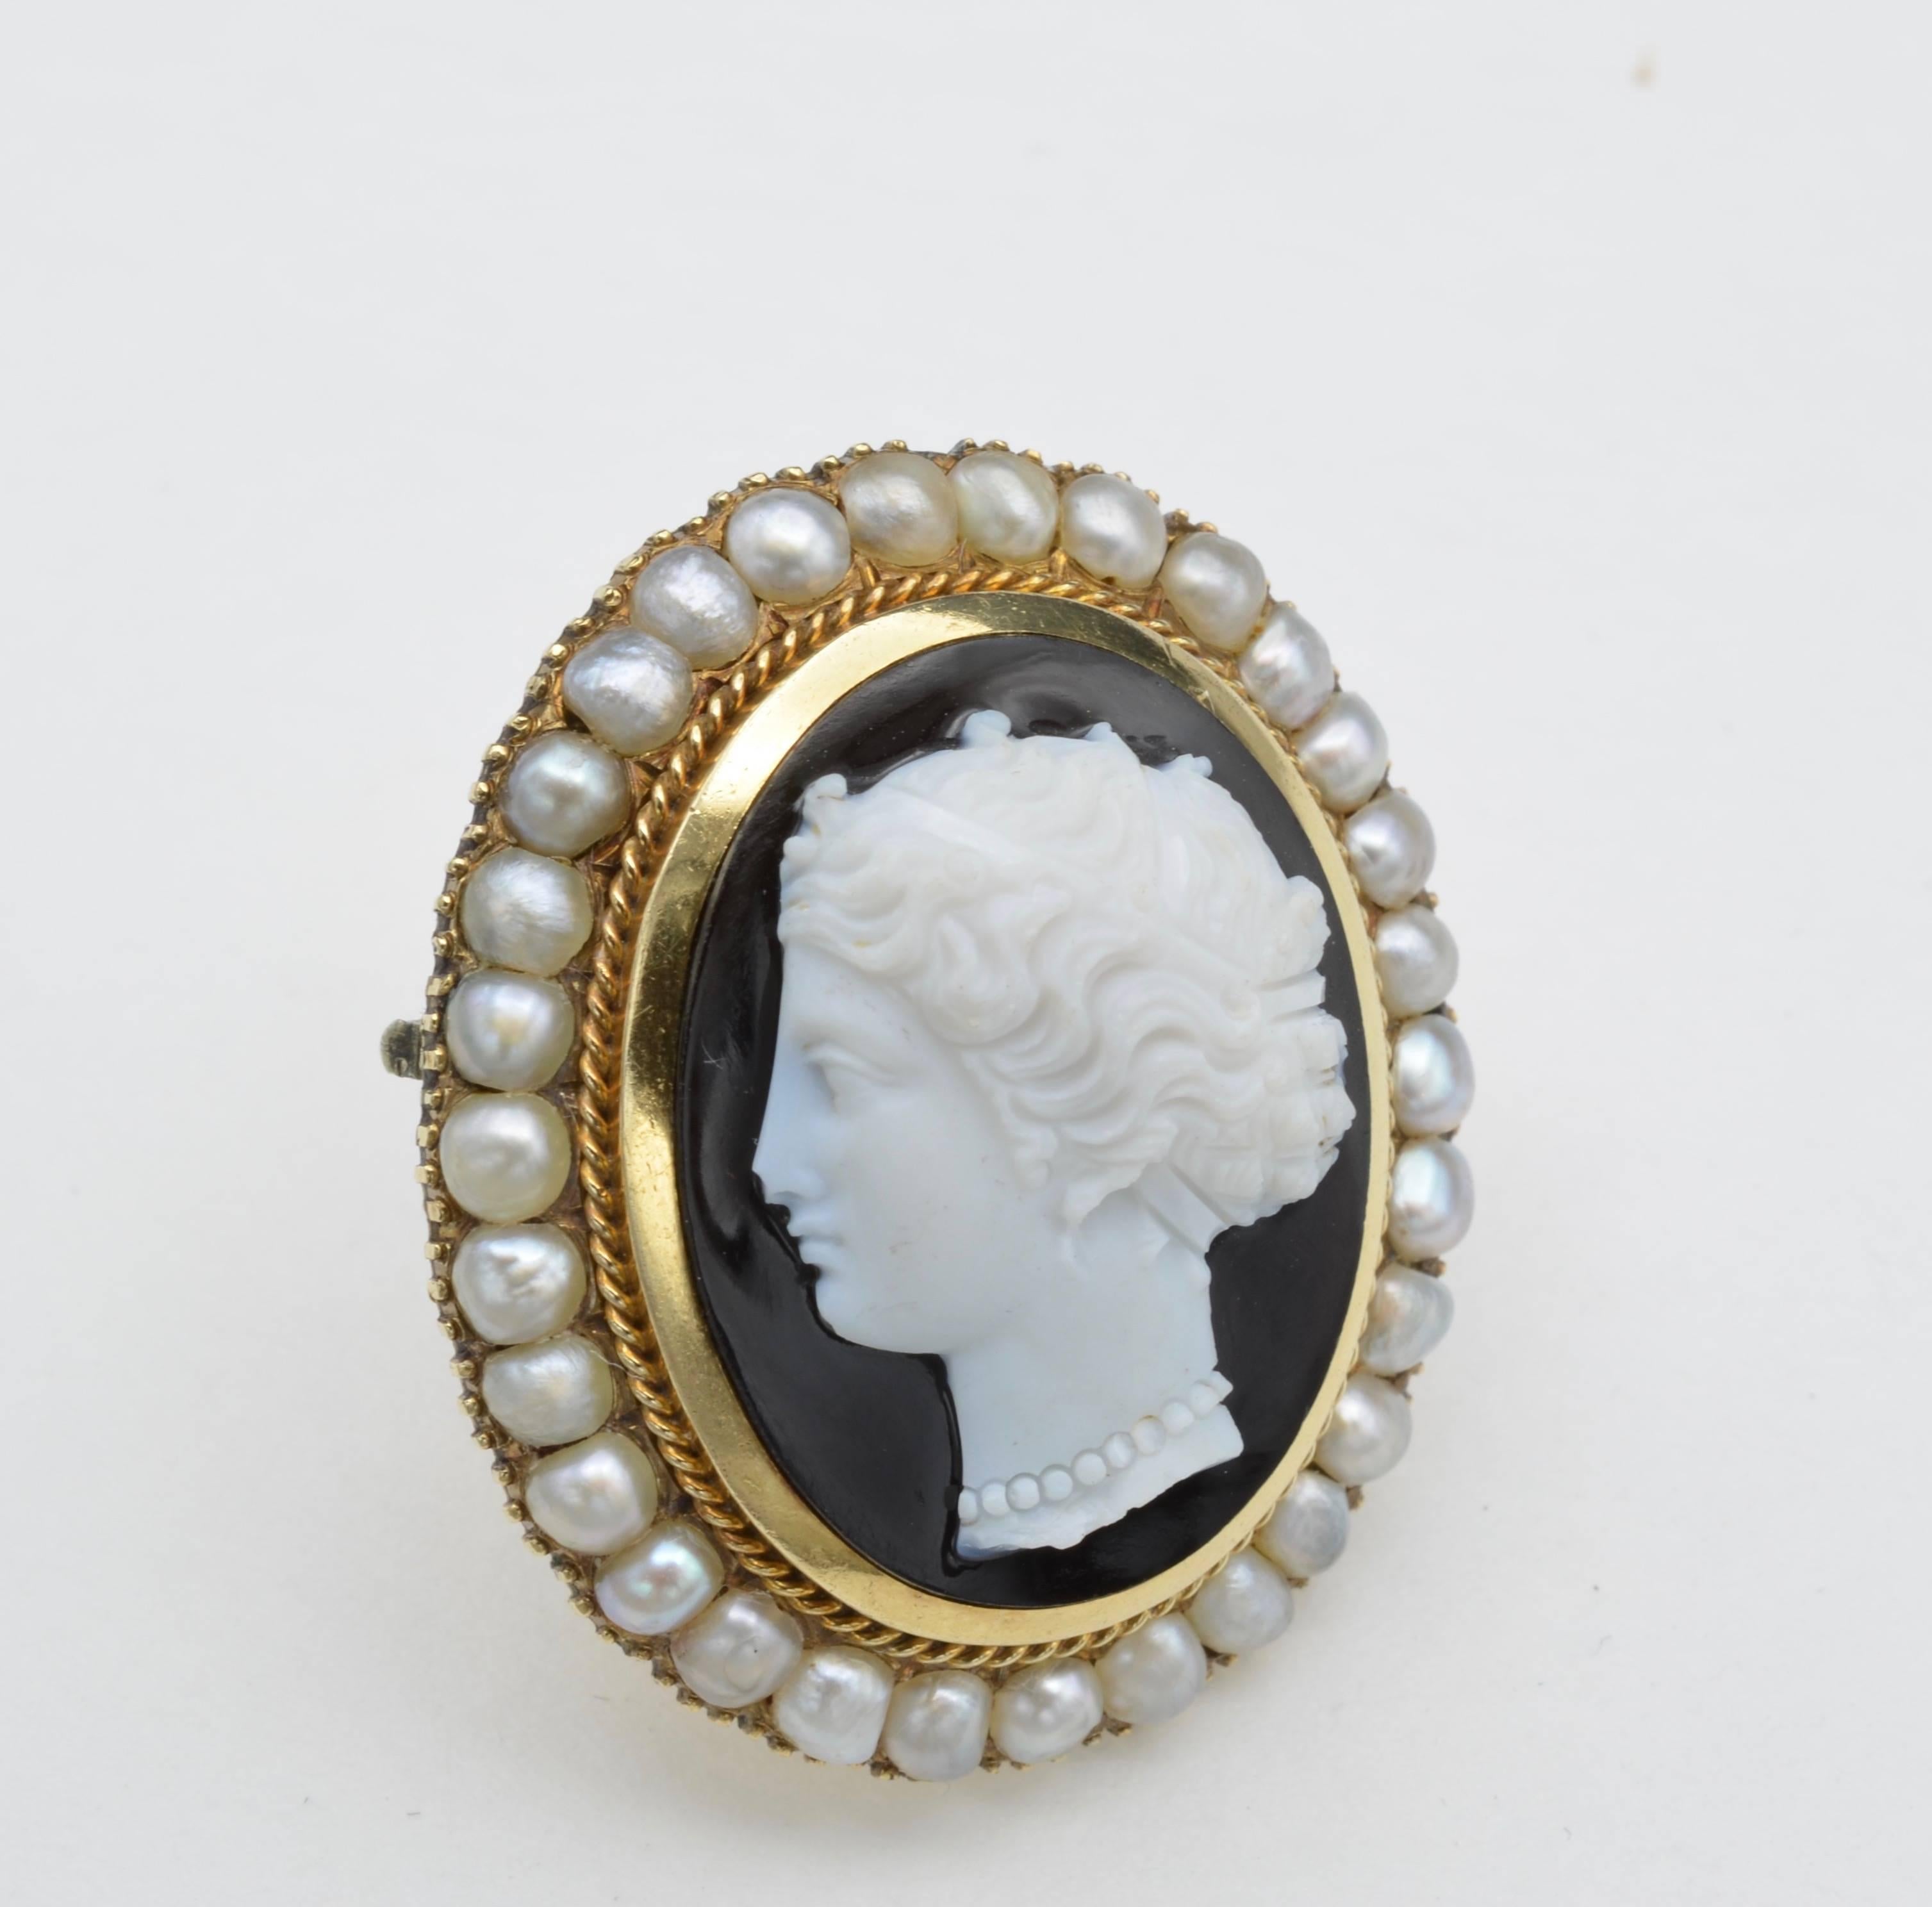 This Napoleon III hand carved onxy brooch has a profile portrait of woman wearing a pearl necklace and bandeau hairpiece. The intricate detail and the skill of the carver are profound. All of the 30 fine natural pearls are 2.5mm in diameter.